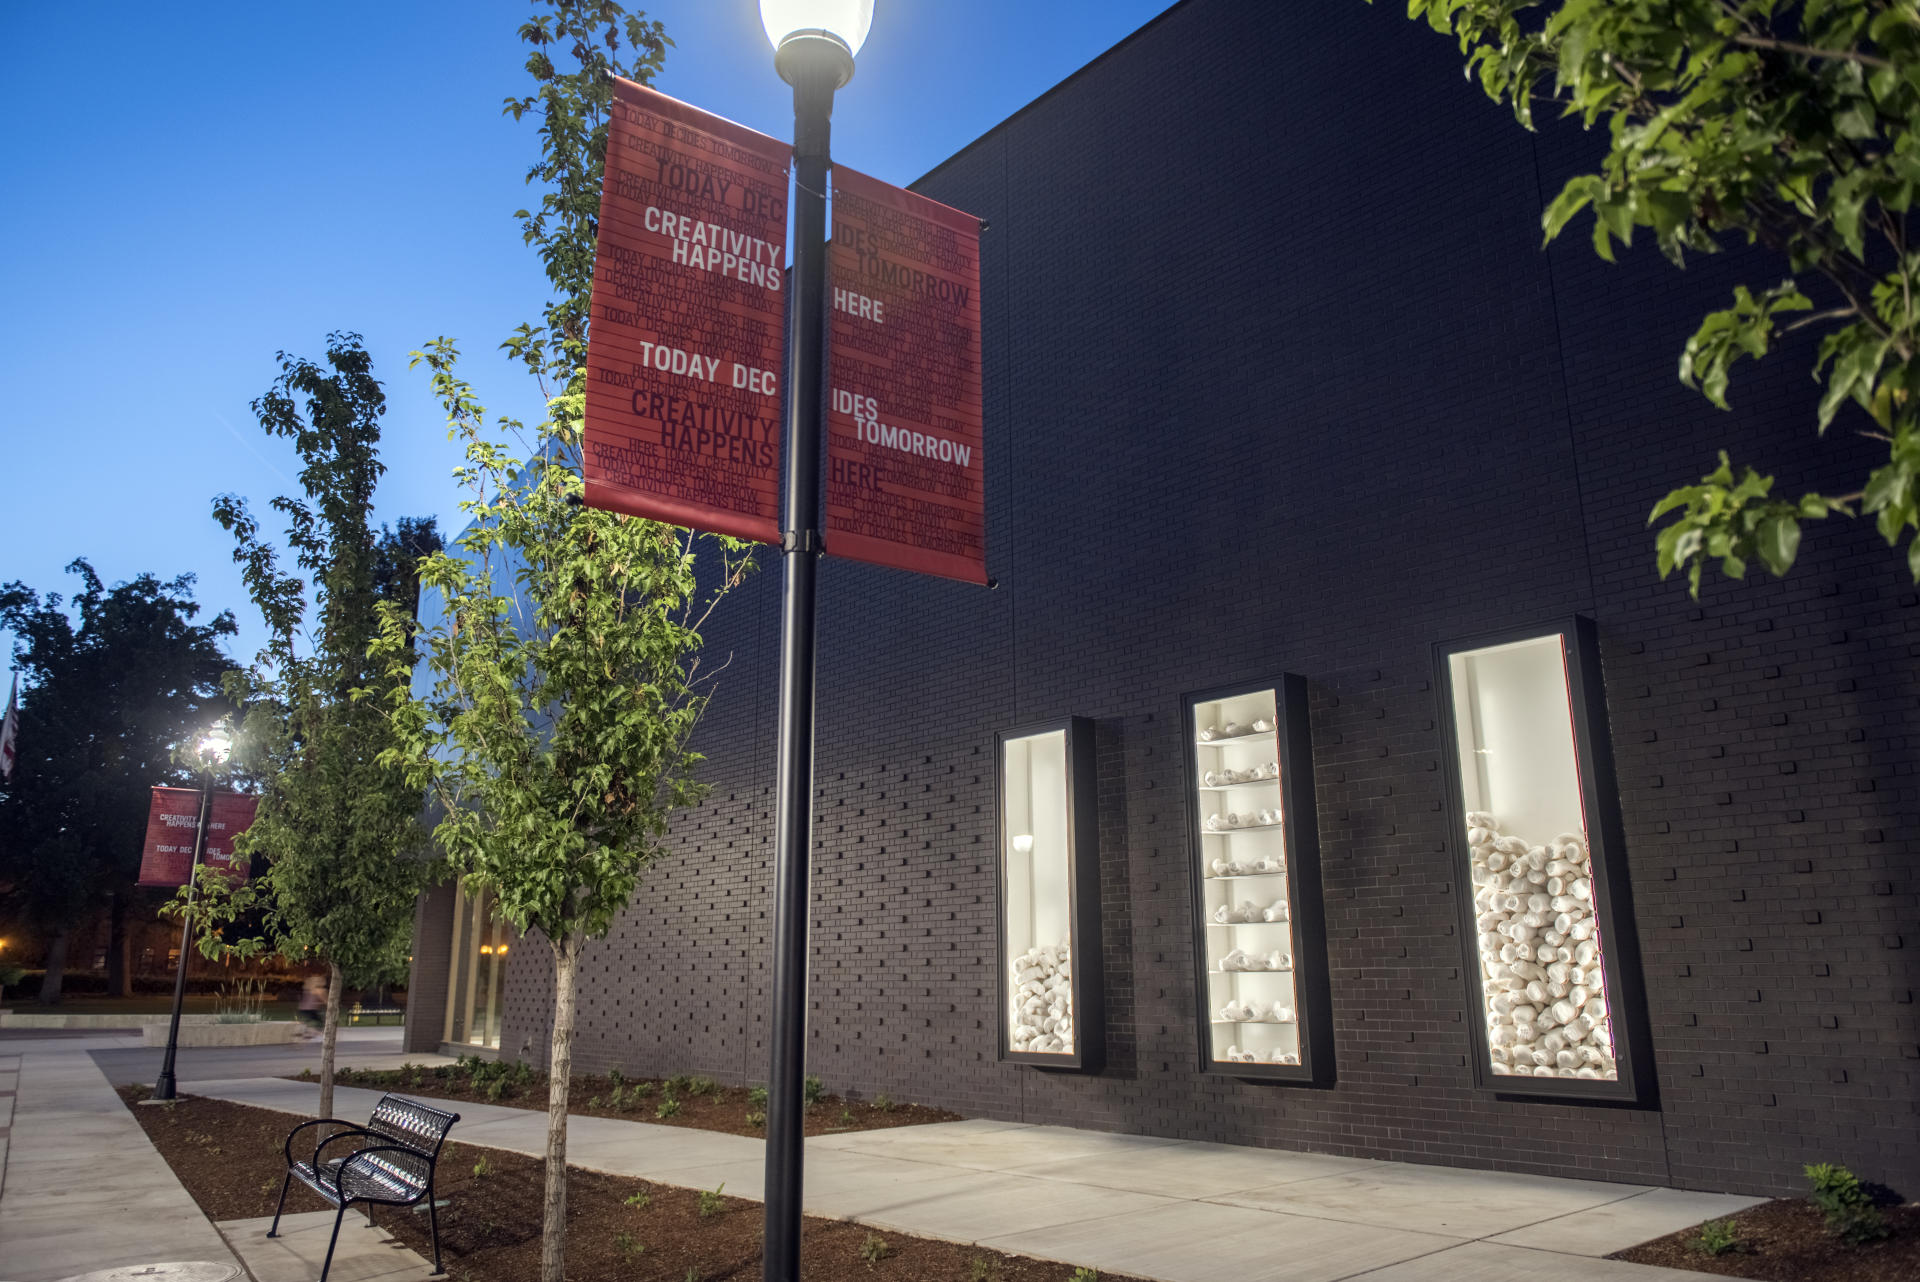 Creativity happens here, with our new Arts and Humanities Building anchoring The Arts District formed by the performance spaces in Laxson Auditorium and the Performing Arts Center.